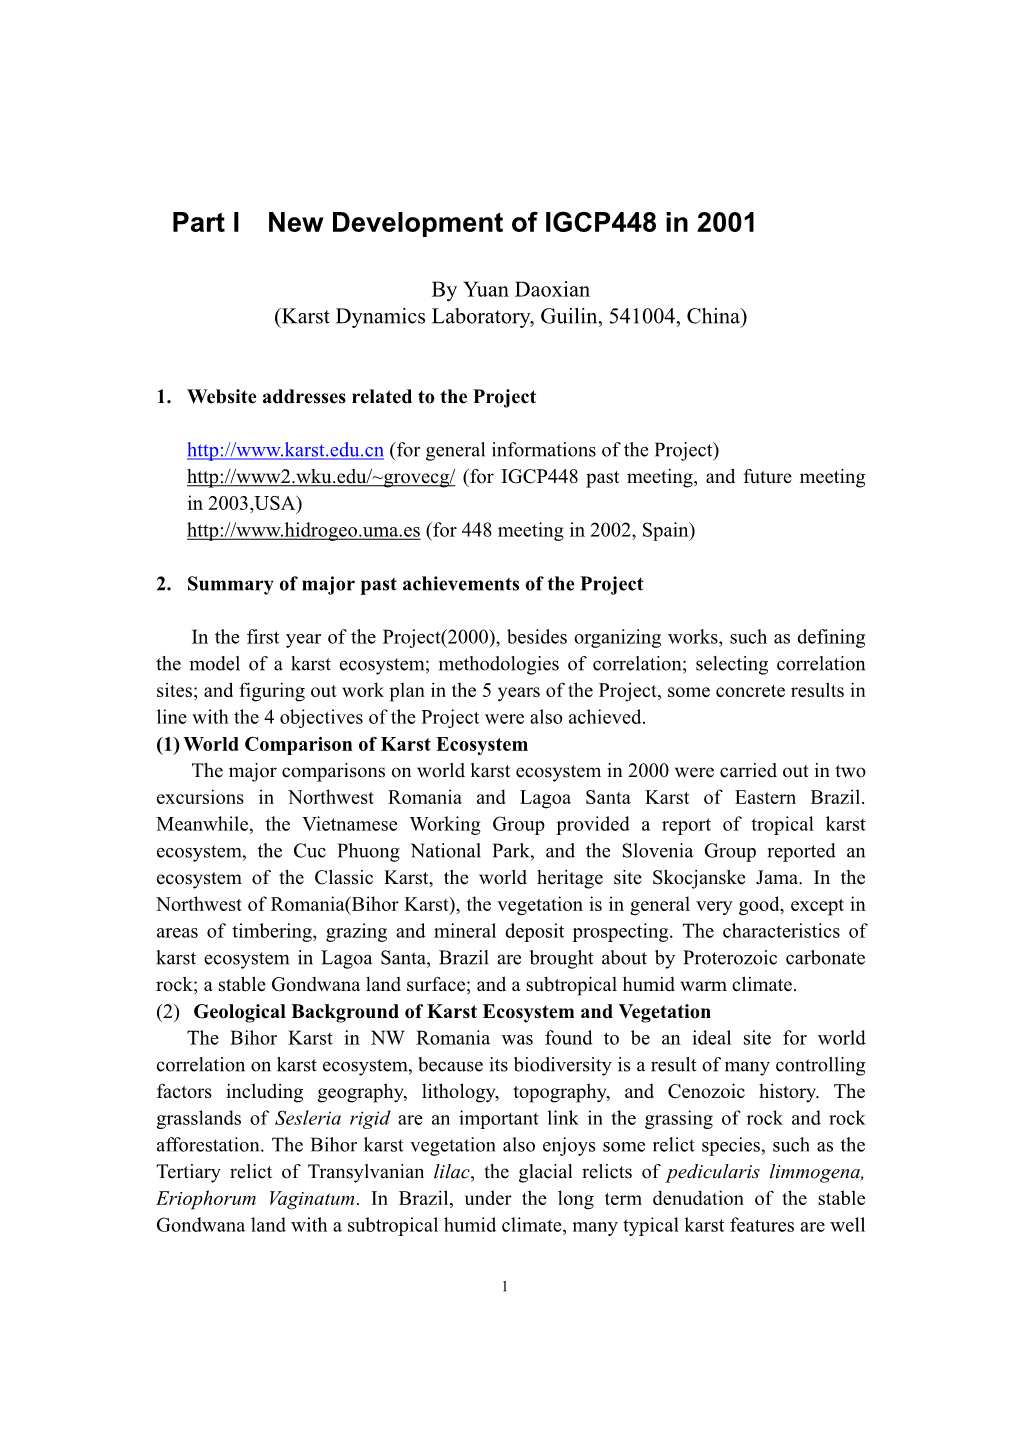 Annual Report* of IGCP Project No